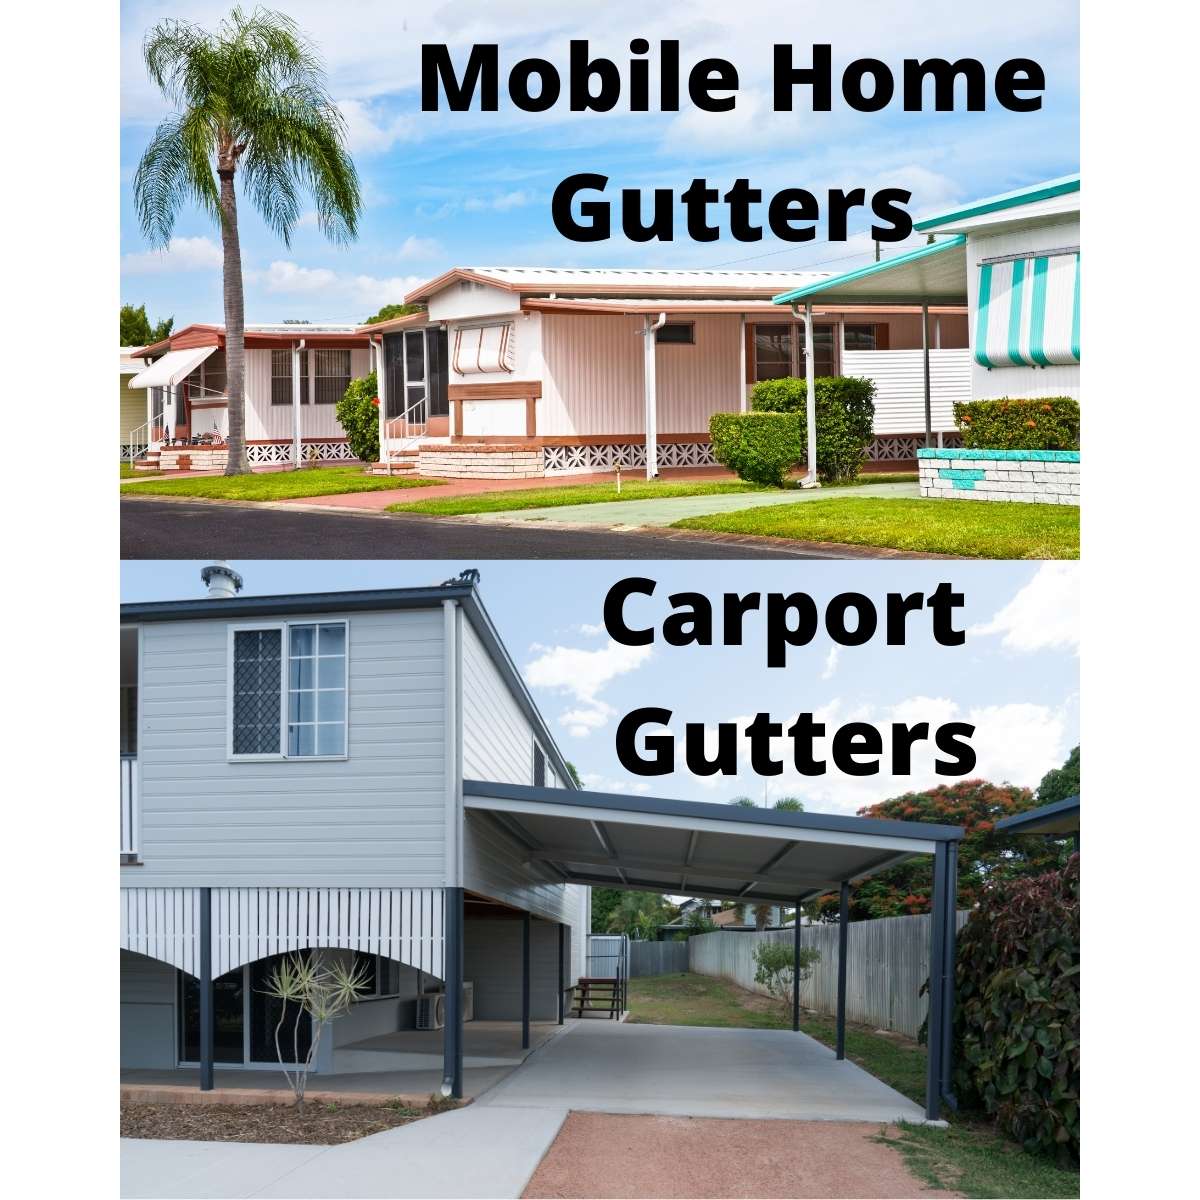 Small gutter guards for mobile homes carports awnings sunroom gutters